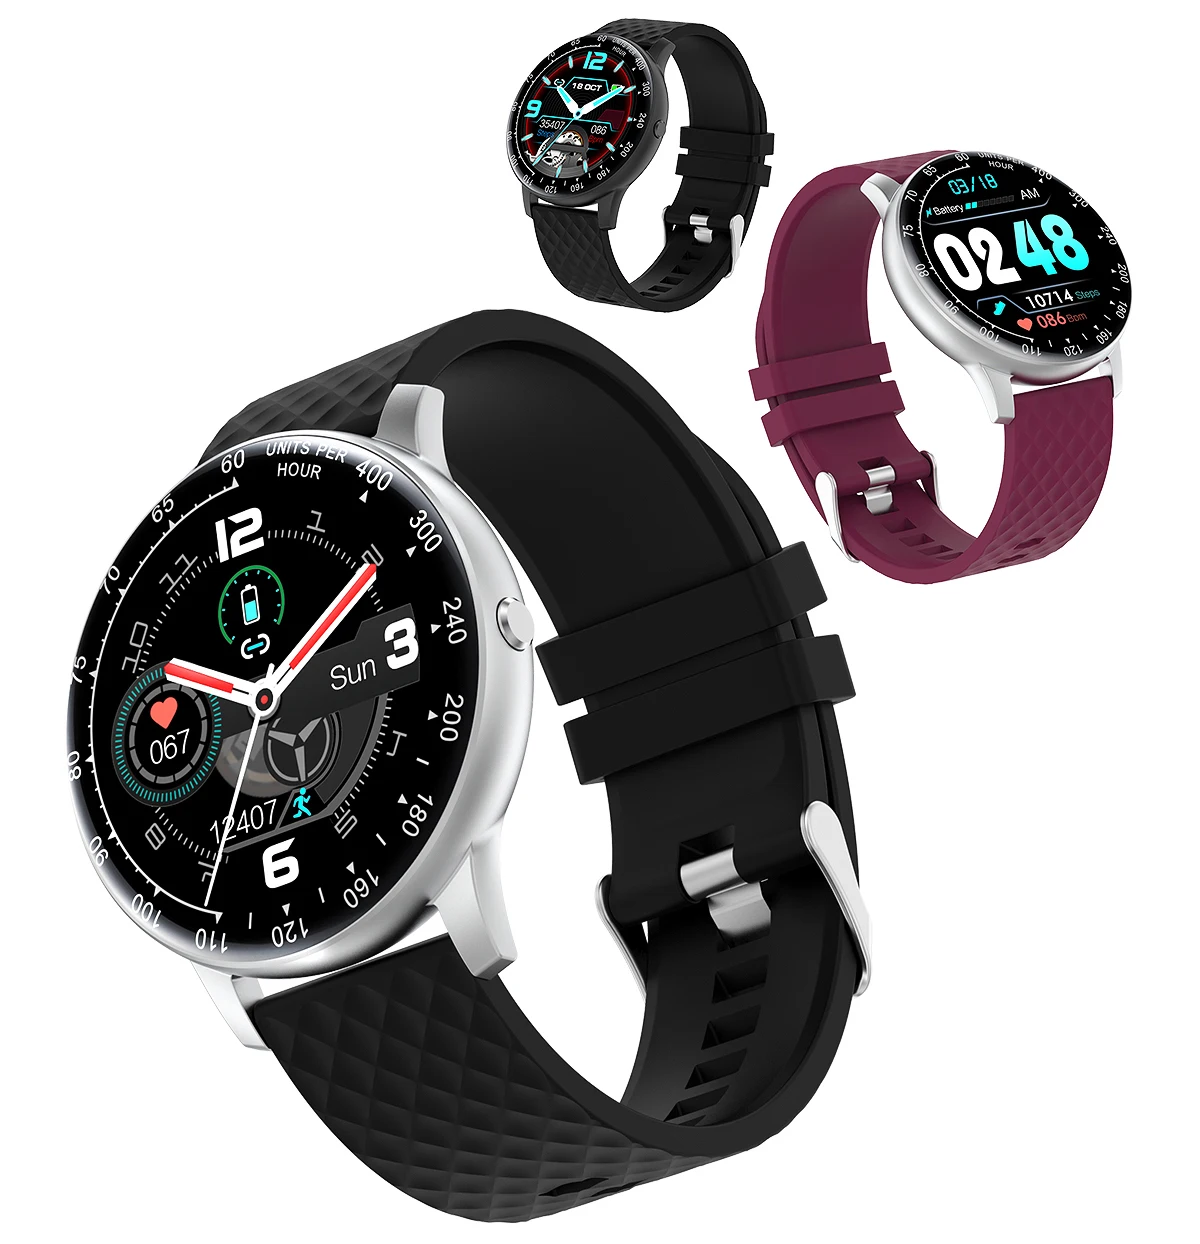 

H30 Customized Album Dial 1.3inch Full Round Touch Screen Smart Fashion Sport Watch IP67 Waterproof with heart rate blood oxygen